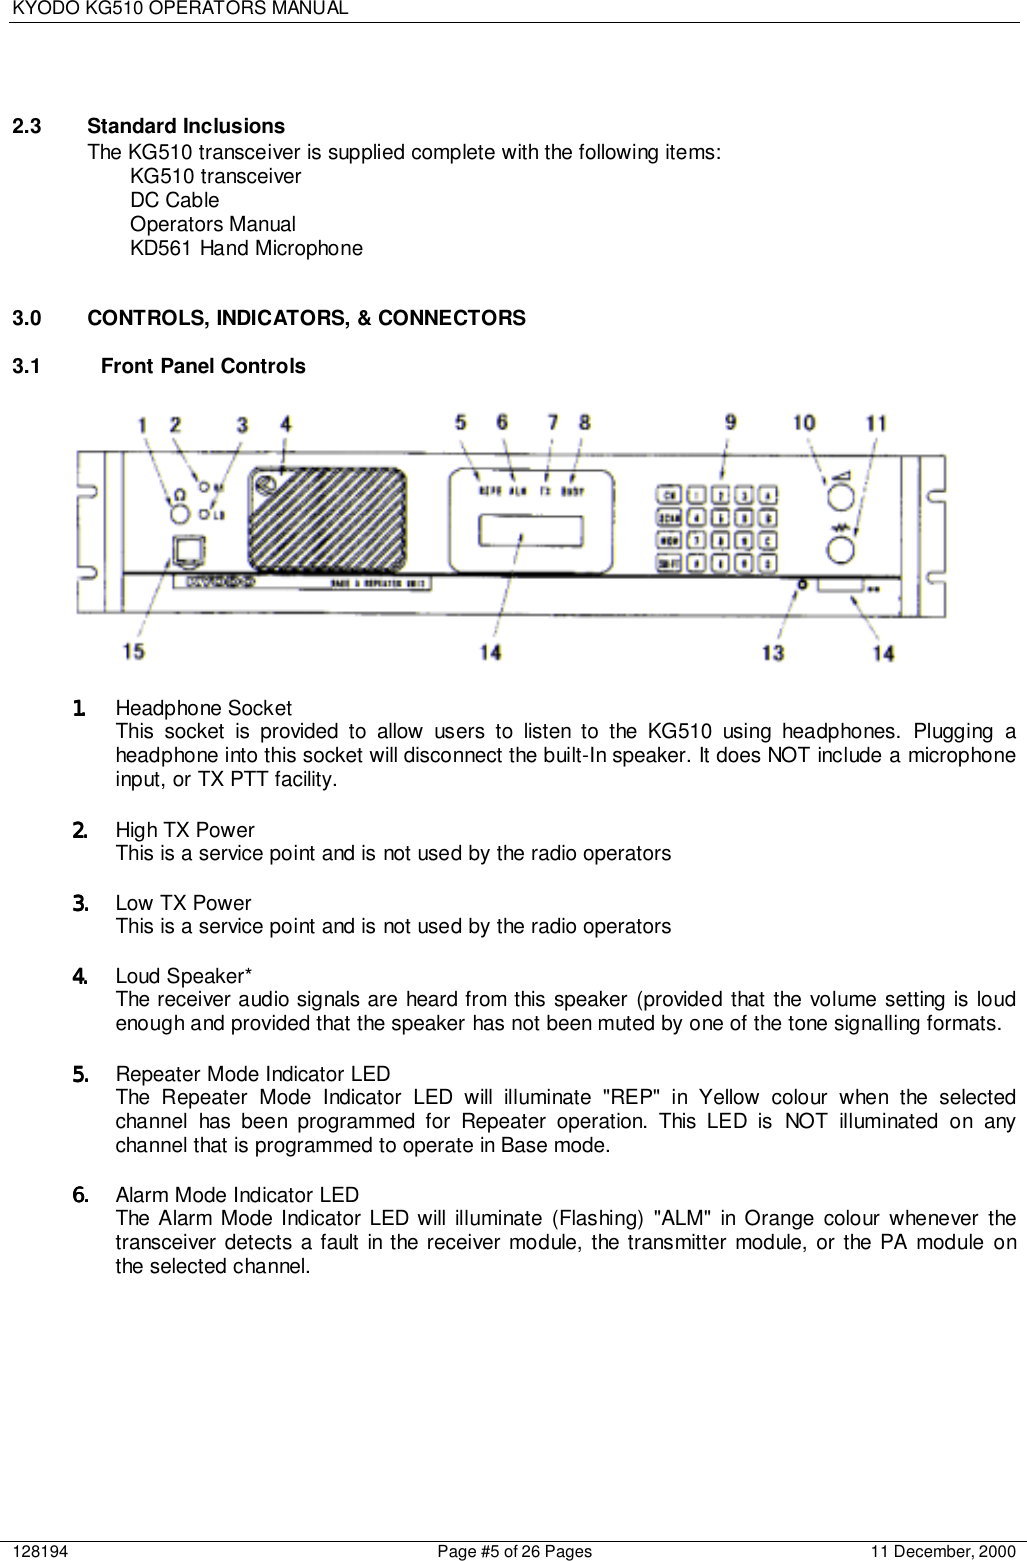 KYODO KG510 OPERATORS MANUAL128194 Page #5 of 26 Pages 11 December, 20002.3 Standard InclusionsThe KG510 transceiver is supplied complete with the following items:KG510 transceiverDC CableOperators ManualKD561 Hand Microphone3.0  CONTROLS, INDICATORS, &amp; CONNECTORS3.1  Front Panel Controls 1.1.1.1. Headphone SocketThis socket is provided to allow users to listen to the KG510 using headphones. Plugging aheadphone into this socket will disconnect the built-In speaker. It does NOT include a microphoneinput, or TX PTT facility.2.2.2.2. High TX PowerThis is a service point and is not used by the radio operators3.3.3.3. Low TX PowerThis is a service point and is not used by the radio operators4.4.4.4. Loud Speaker*The receiver audio signals are heard from this speaker (provided that the volume setting is loudenough and provided that the speaker has not been muted by one of the tone signalling formats.5.5.5.5. Repeater Mode Indicator LEDThe Repeater Mode Indicator LED will illuminate &quot;REP&quot; in Yellow colour when the selectedchannel has been programmed for Repeater operation. This LED is NOT illuminated on anychannel that is programmed to operate in Base mode.6.6.6.6. Alarm Mode Indicator LEDThe Alarm Mode Indicator LED will illuminate (Flashing) &quot;ALM&quot; in Orange colour whenever thetransceiver detects a fault in the receiver module, the transmitter module, or the PA module onthe selected channel.